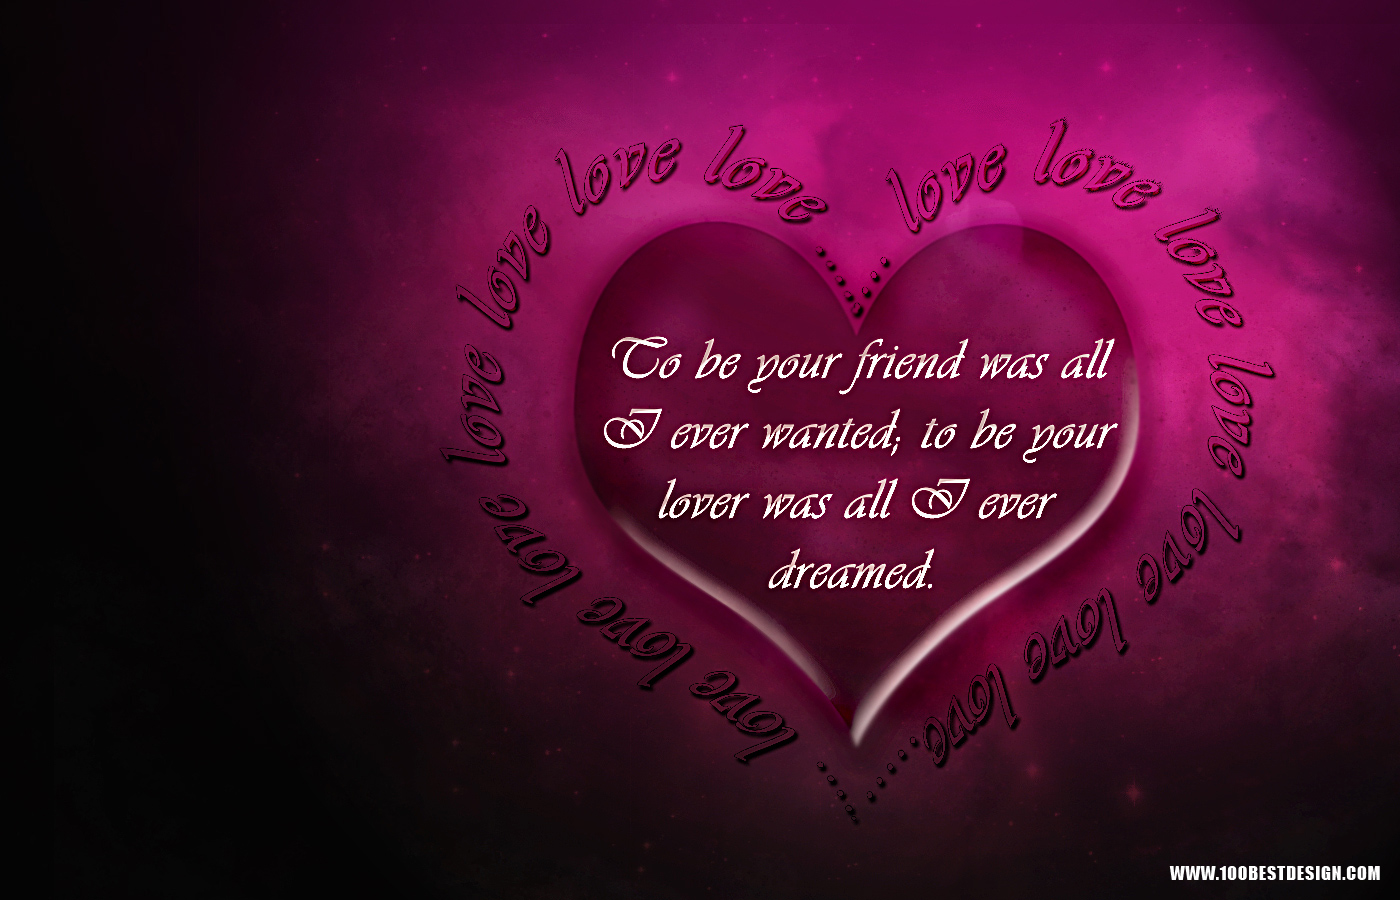 Love Wallpaper With Messages HD Quotes Heart Background